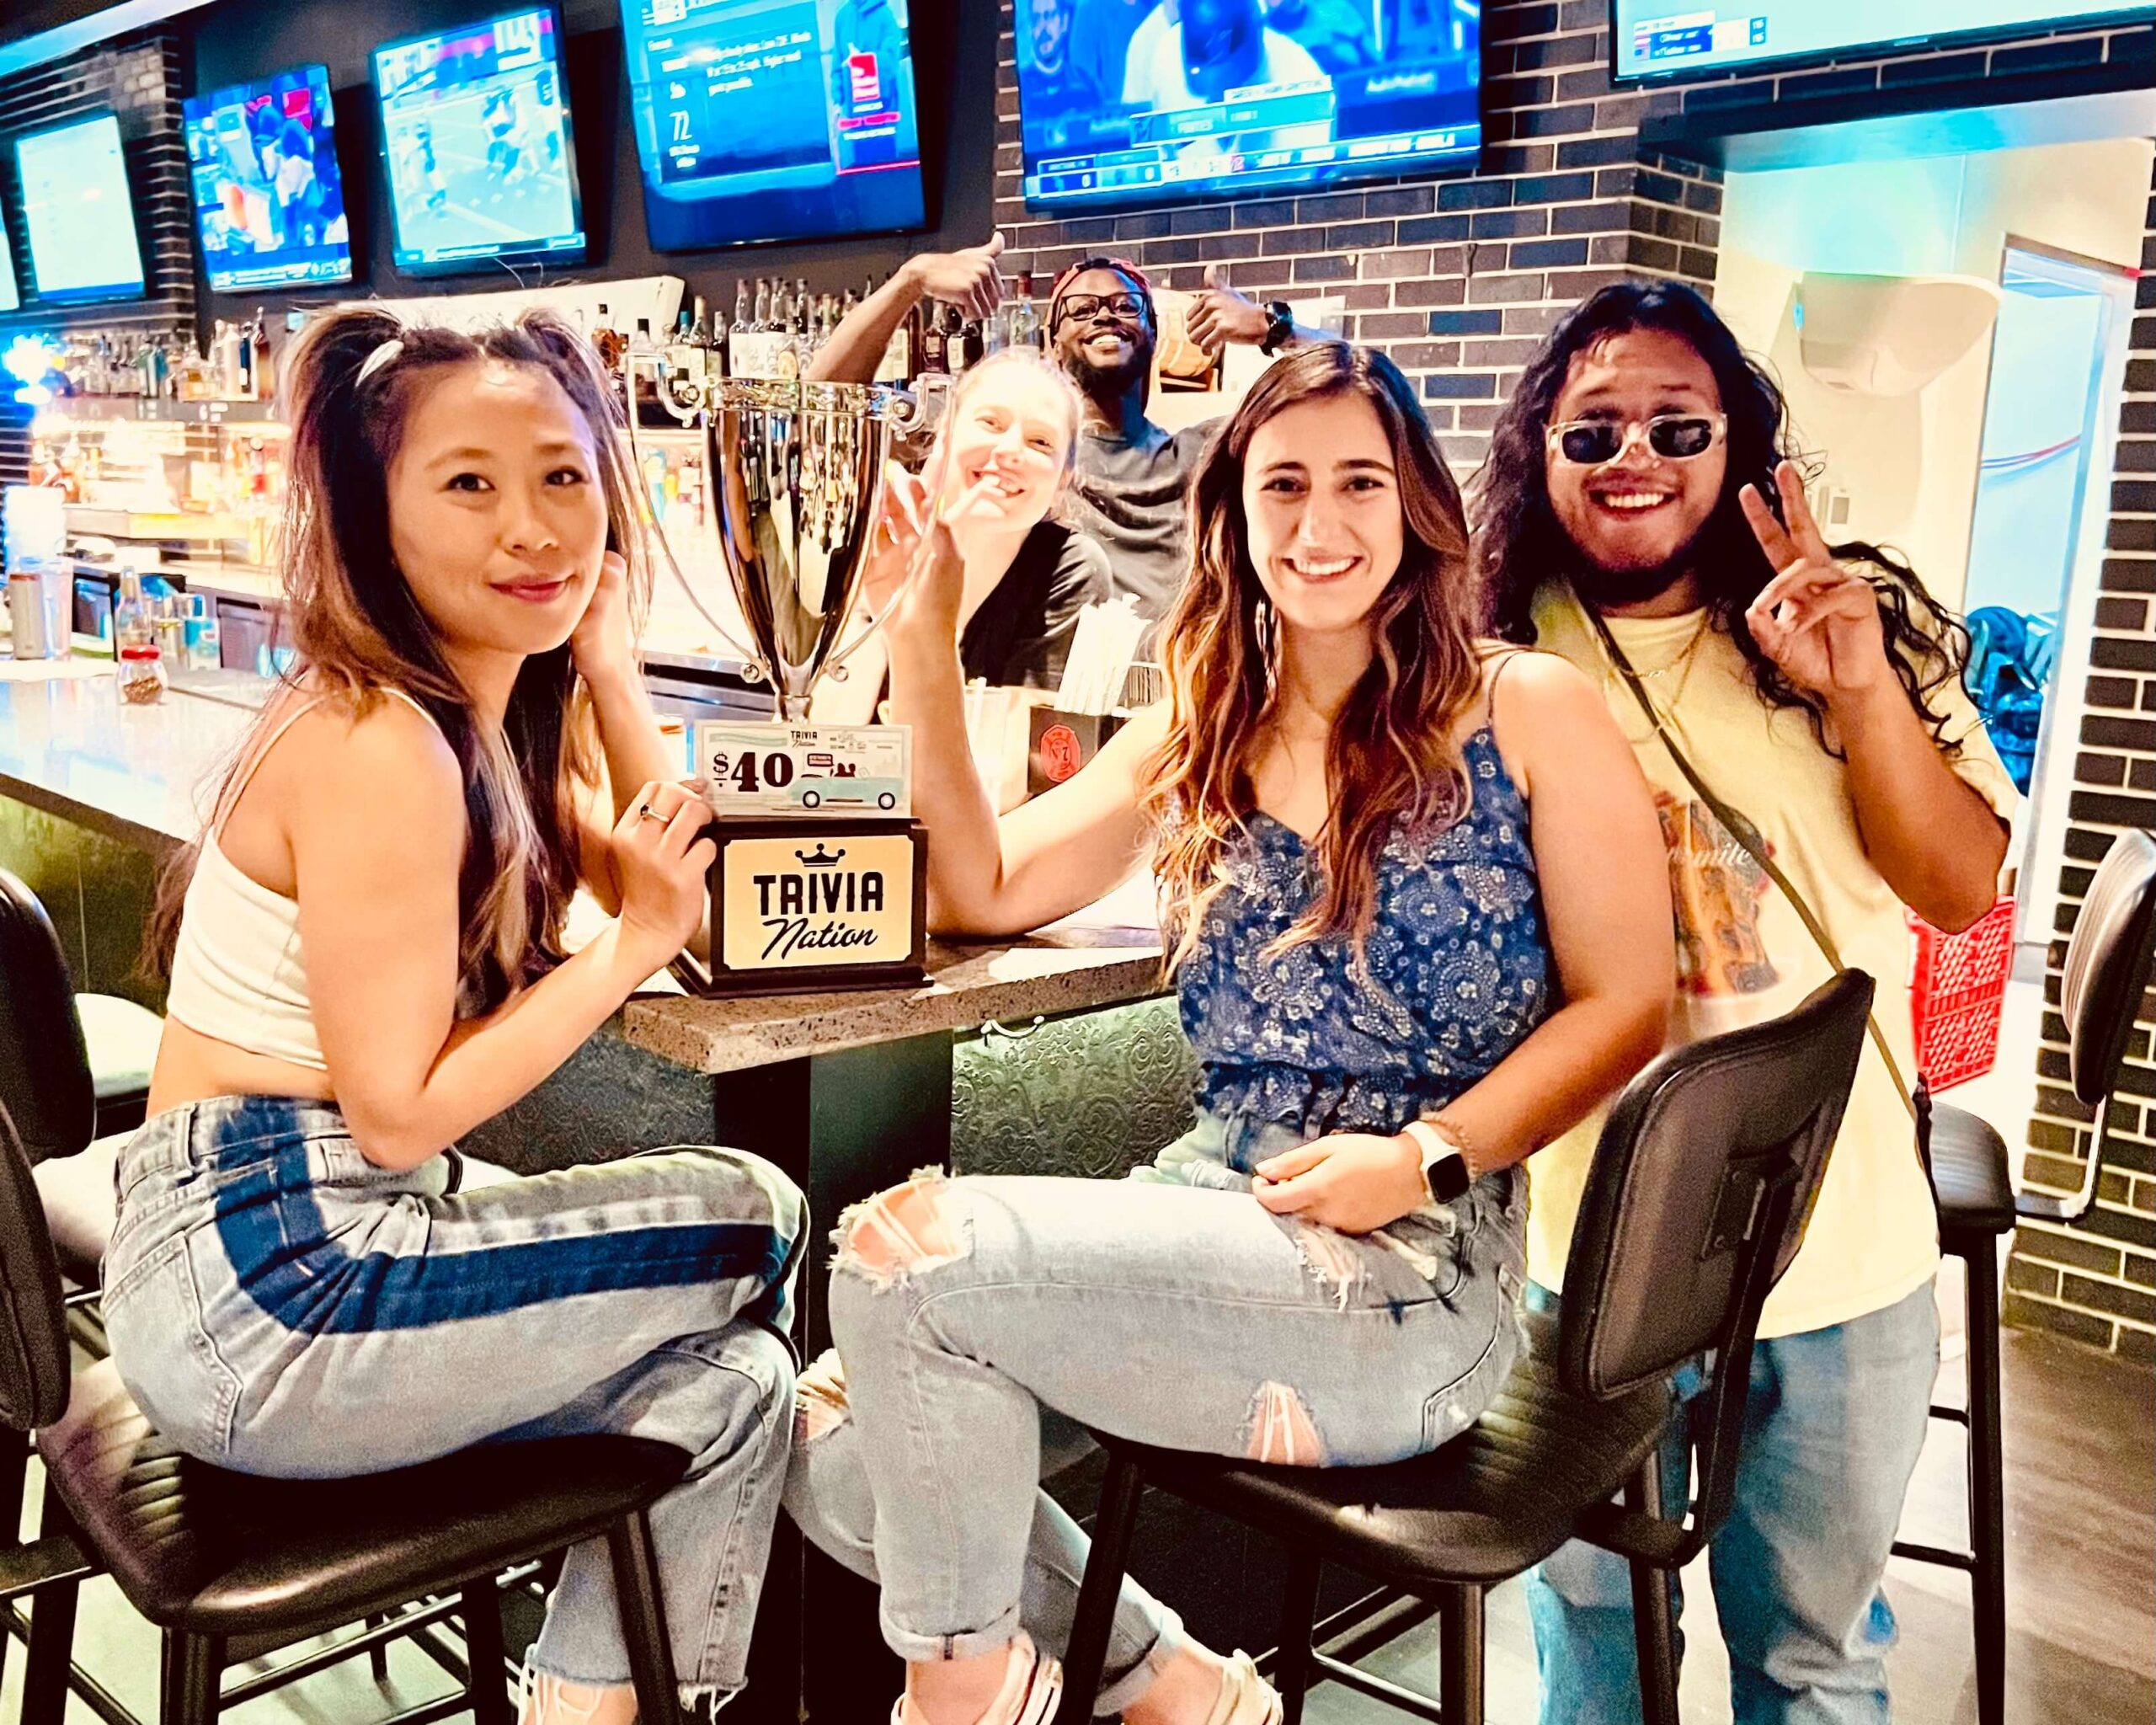 Mellow Mushroom Jacksonville FL 33205 trivia night: two girls seated at a bar smiling with a Trivia Nation trophy between them and a man with long hair next to them smiling